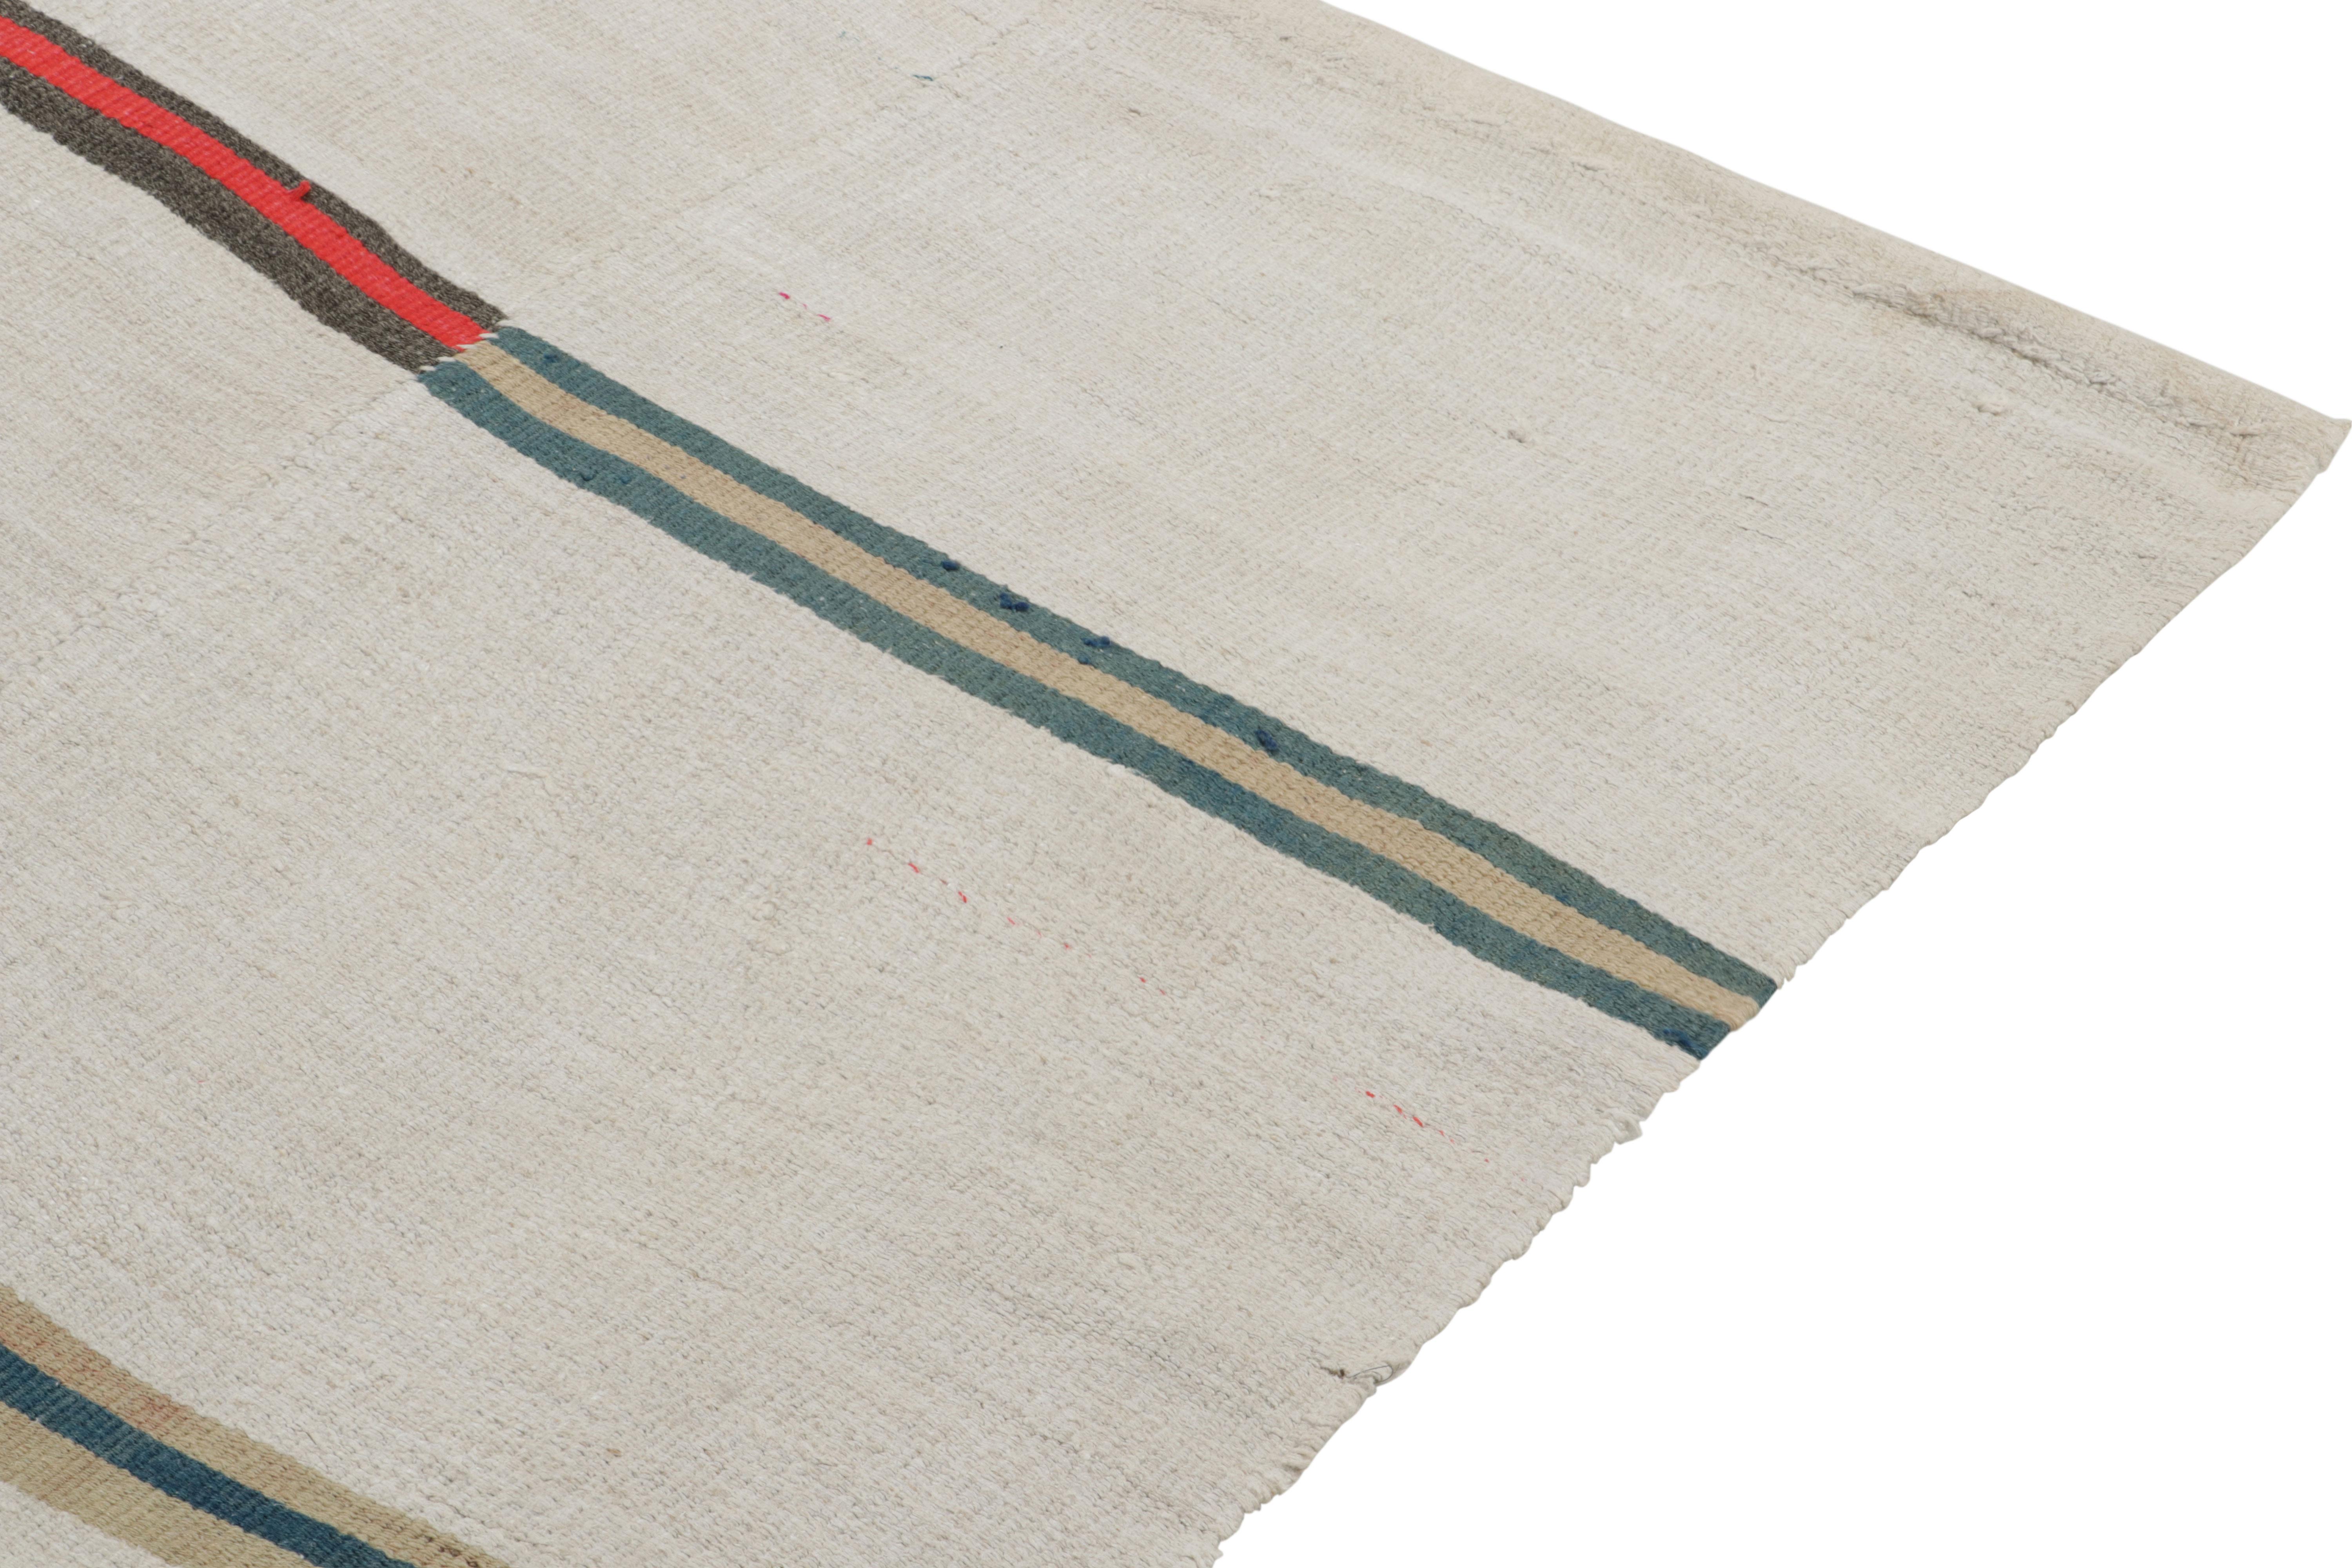 Turkish Vintage Kilim rug in Off-White, Red Stripe Patterns, Panel style by Rug & Kilim For Sale